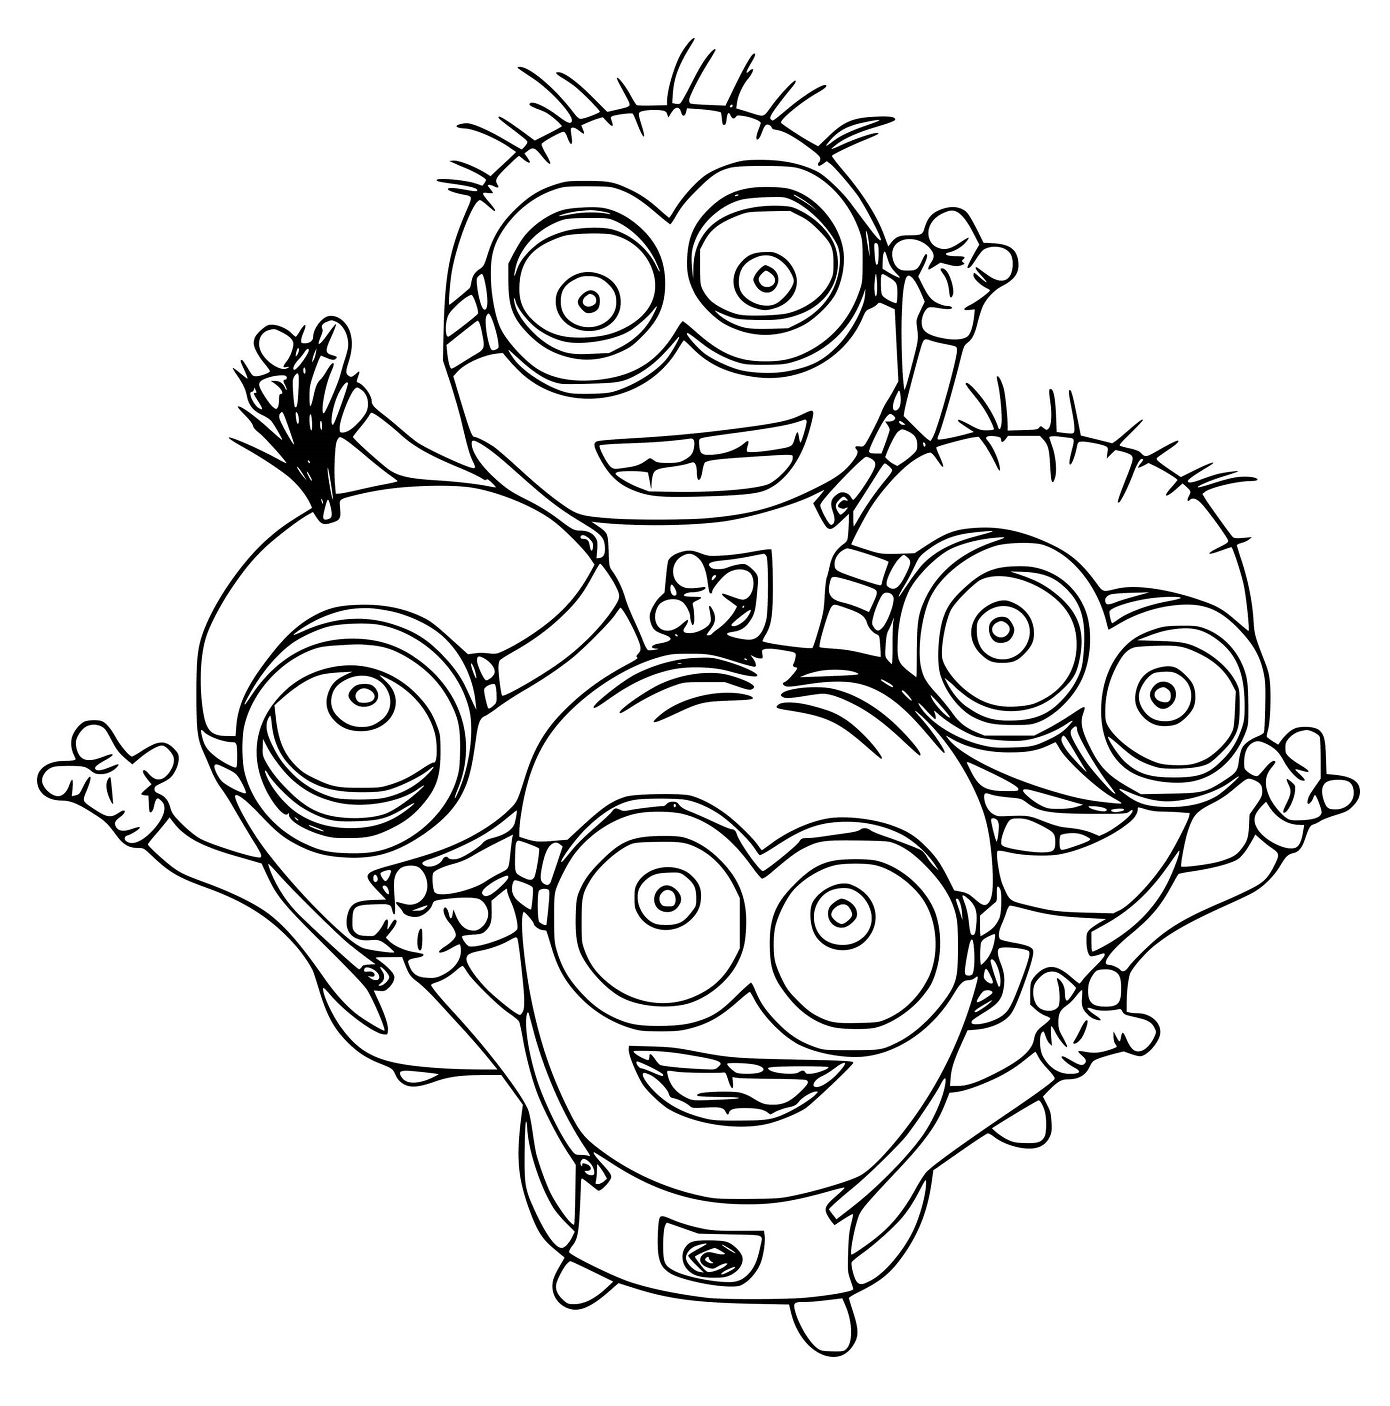 Minions going crazy Coloring Page Printable for Kids, Free, Simple and Easy, as PDF